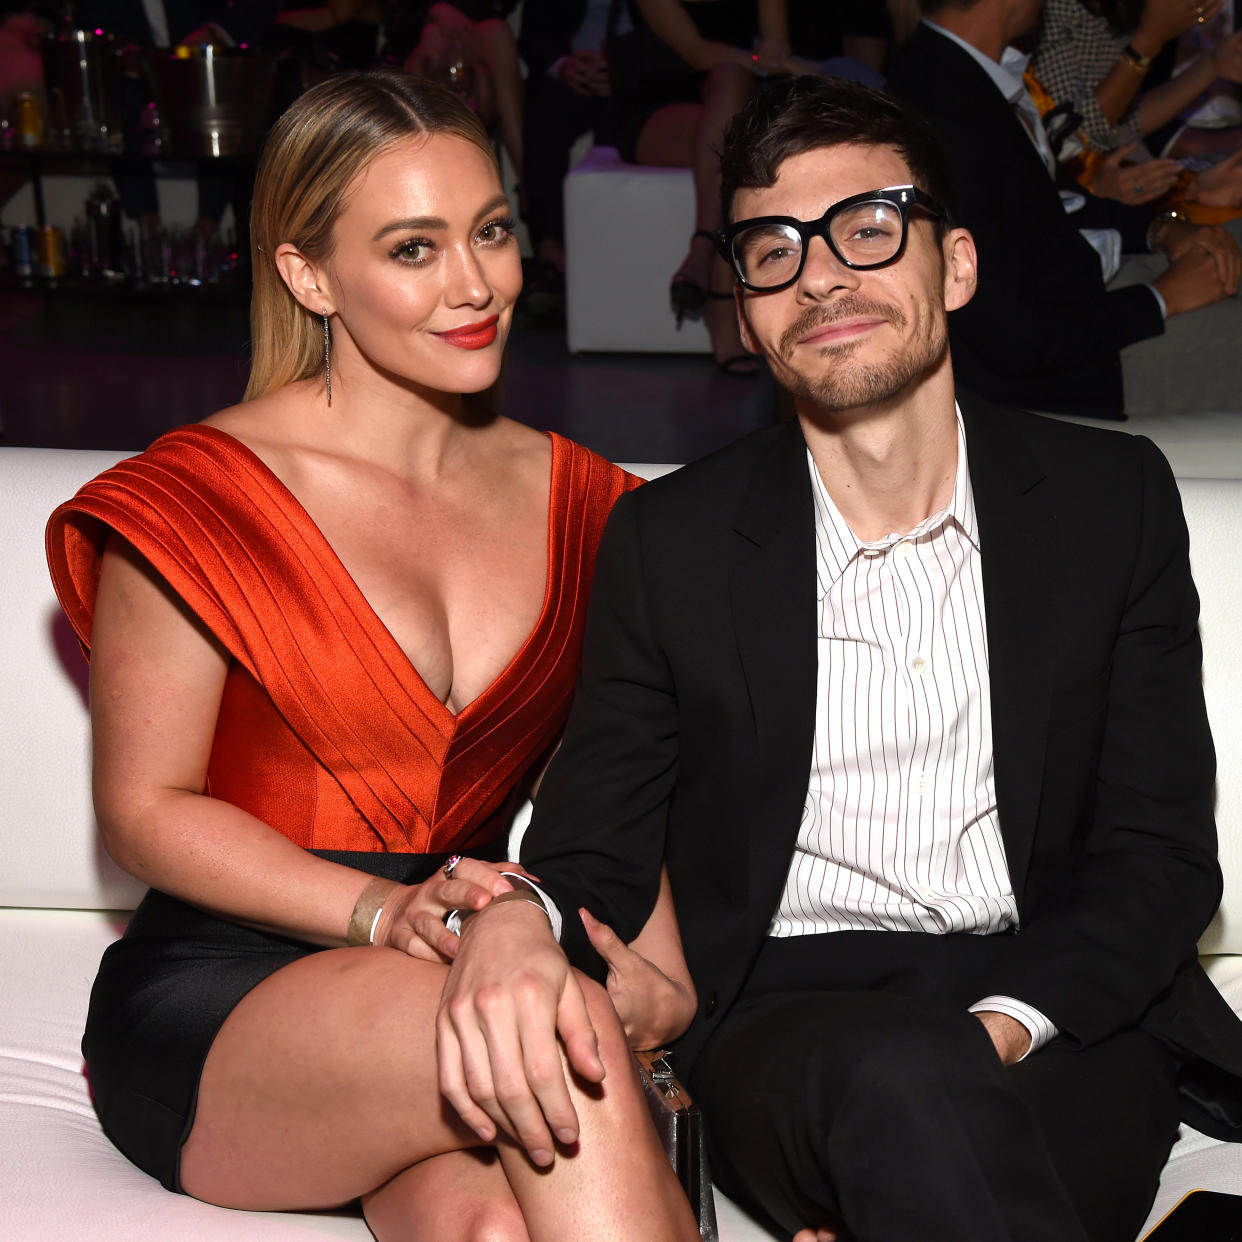 Hilary Duff and new husband Matthew Koma enjoyed an exotic South African safari on their honeymoon. (Photo: Michael Kovac/Getty Images for Adopt Together)